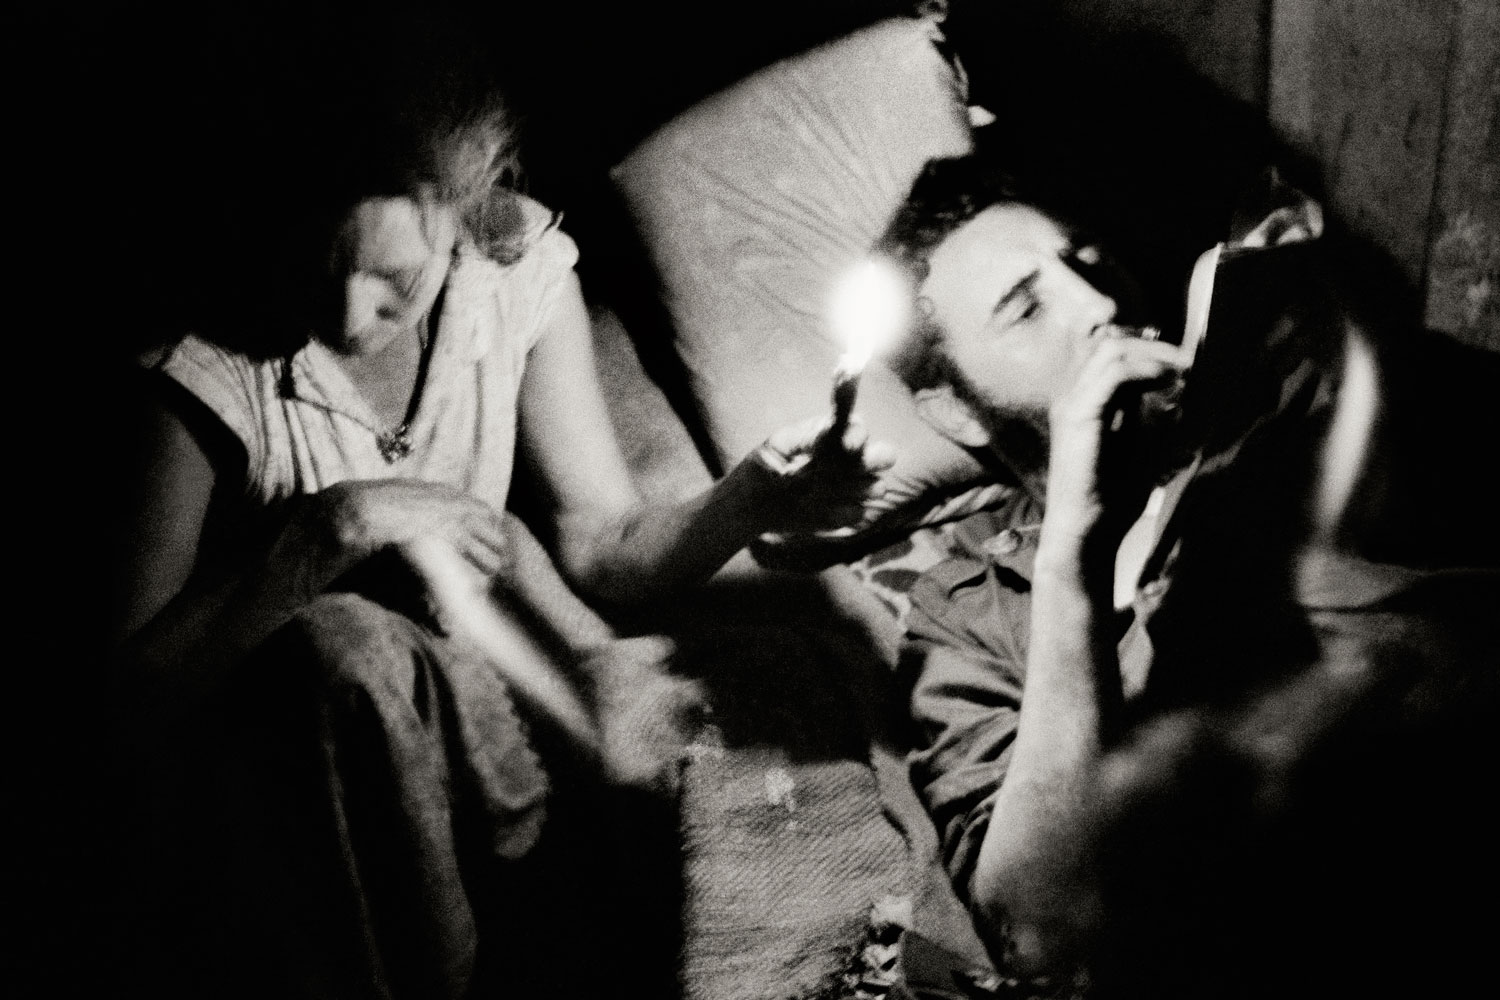 Fidel Castro reads at night during the Battle of Pino del Agua, in the Sierra Maestra mountains, Cuba, 1958.